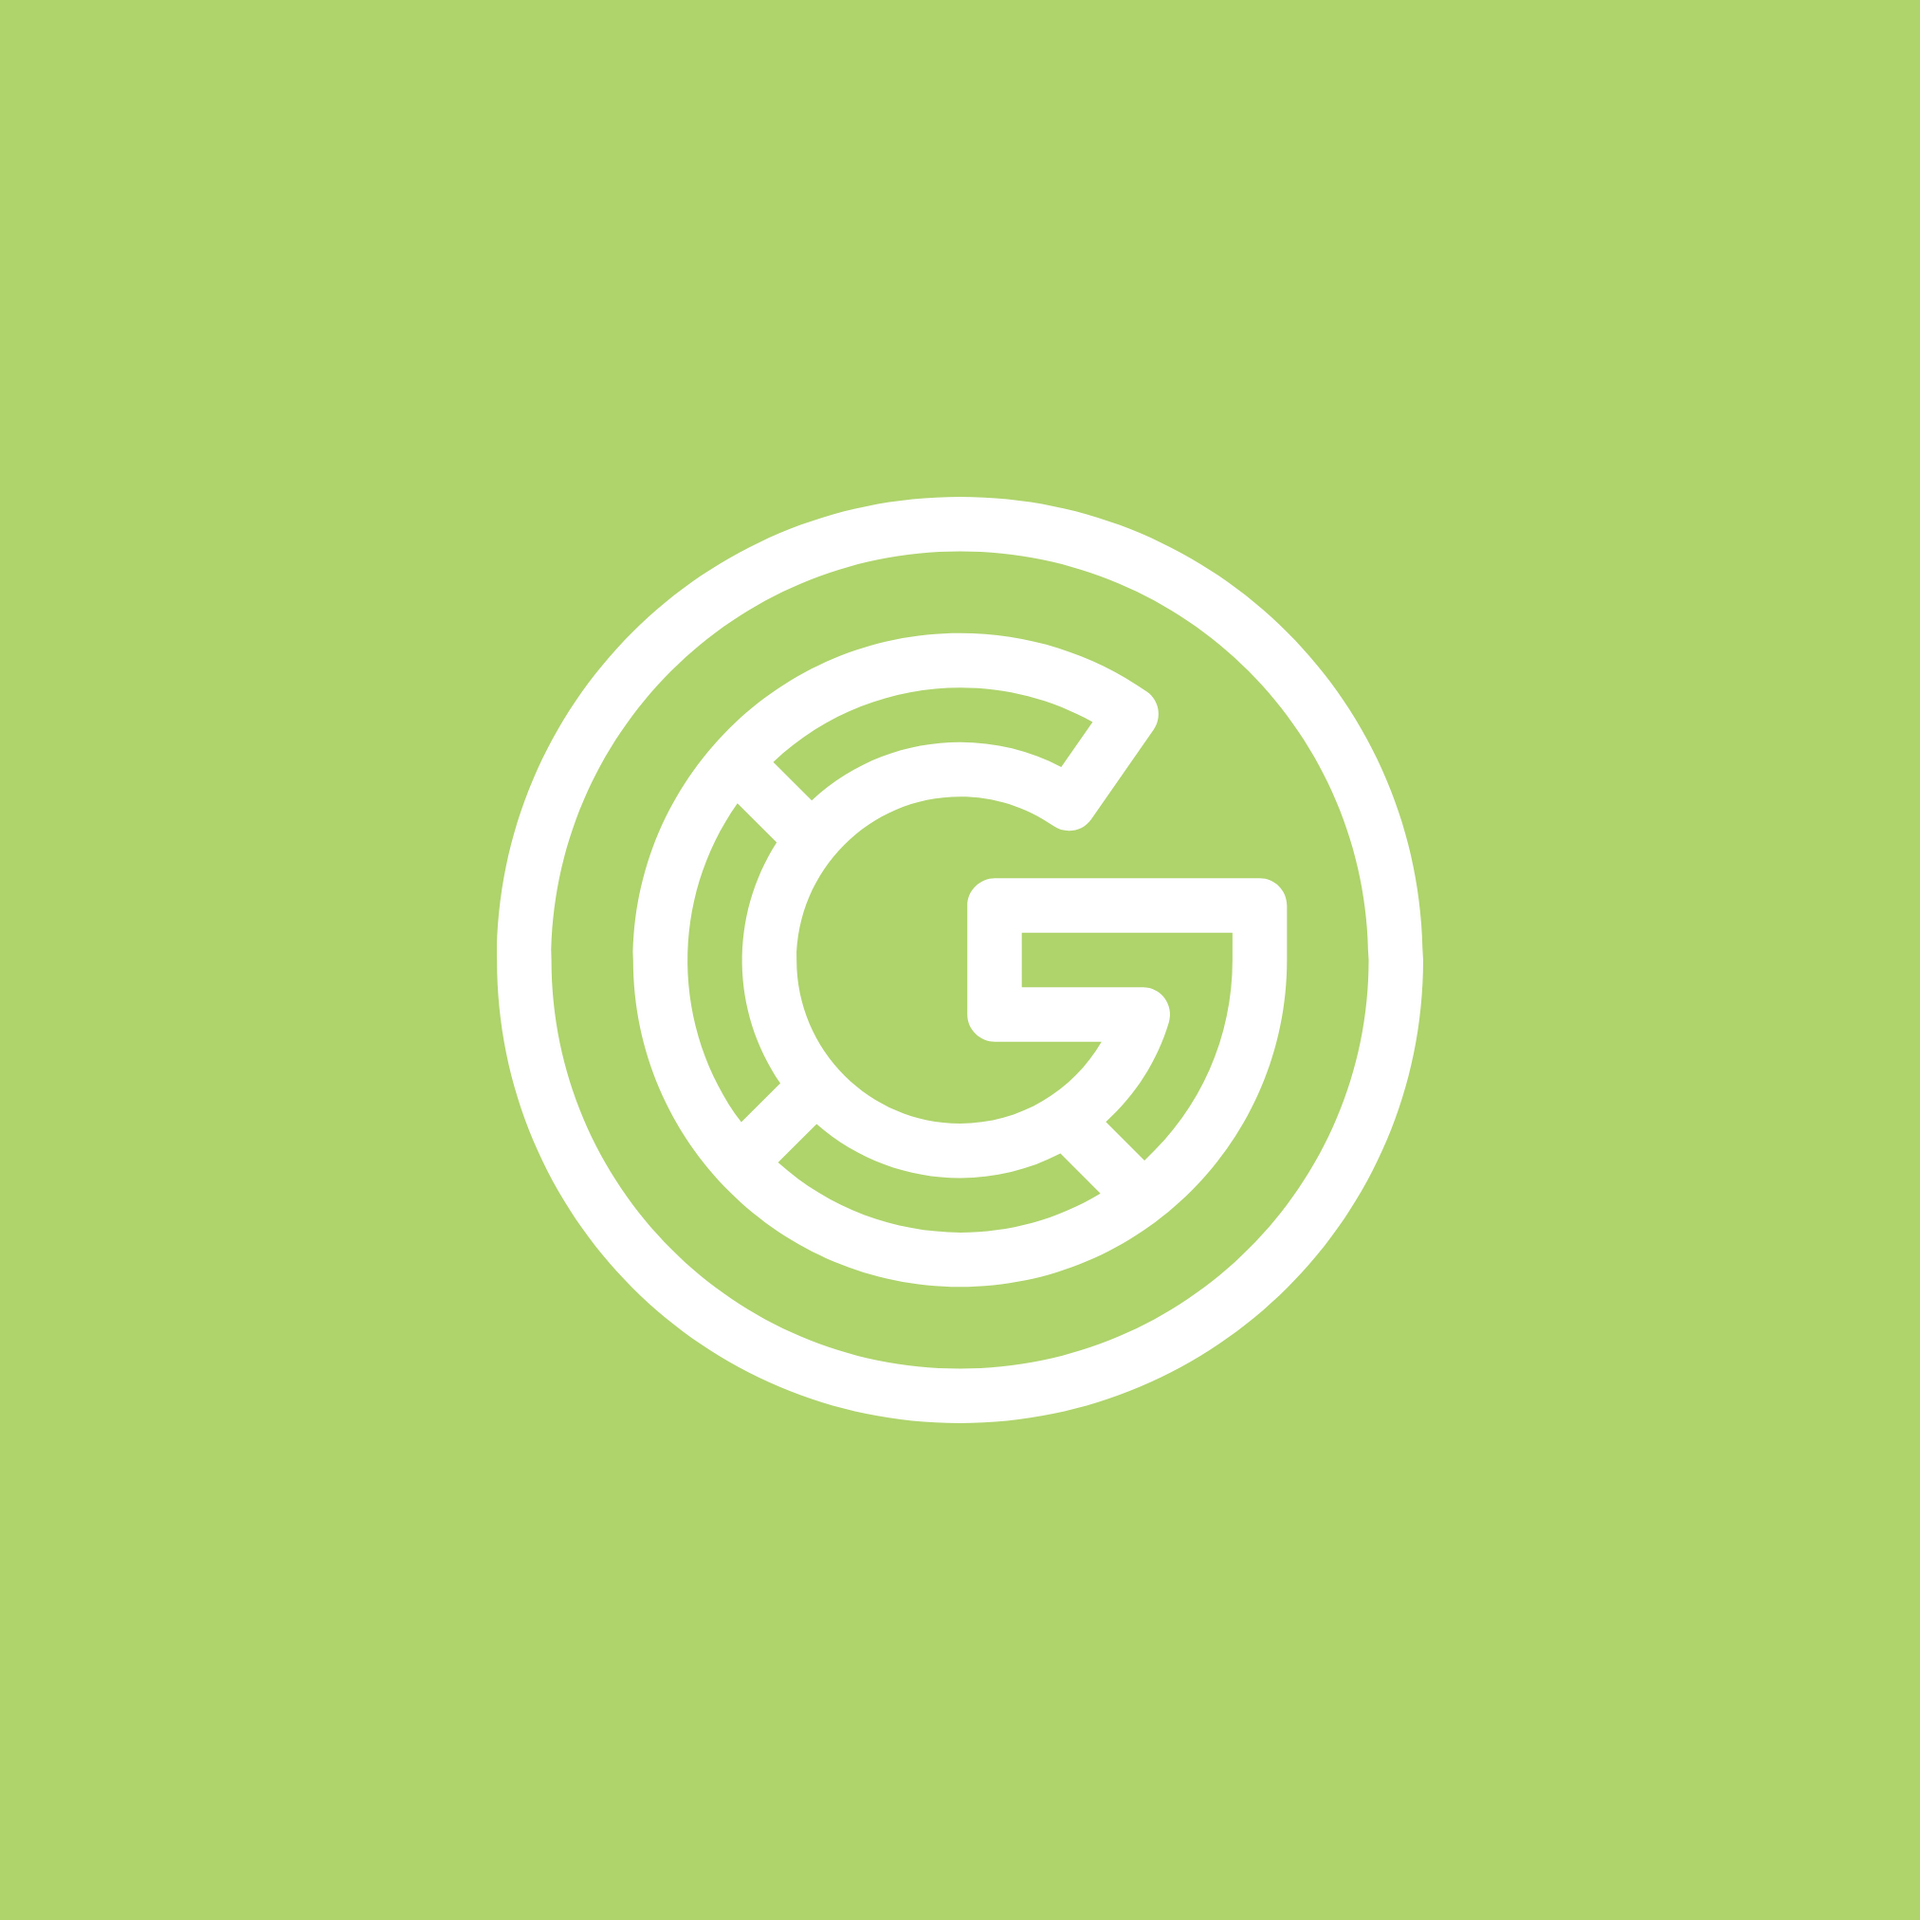 The letter g is in a white circle on a green background.